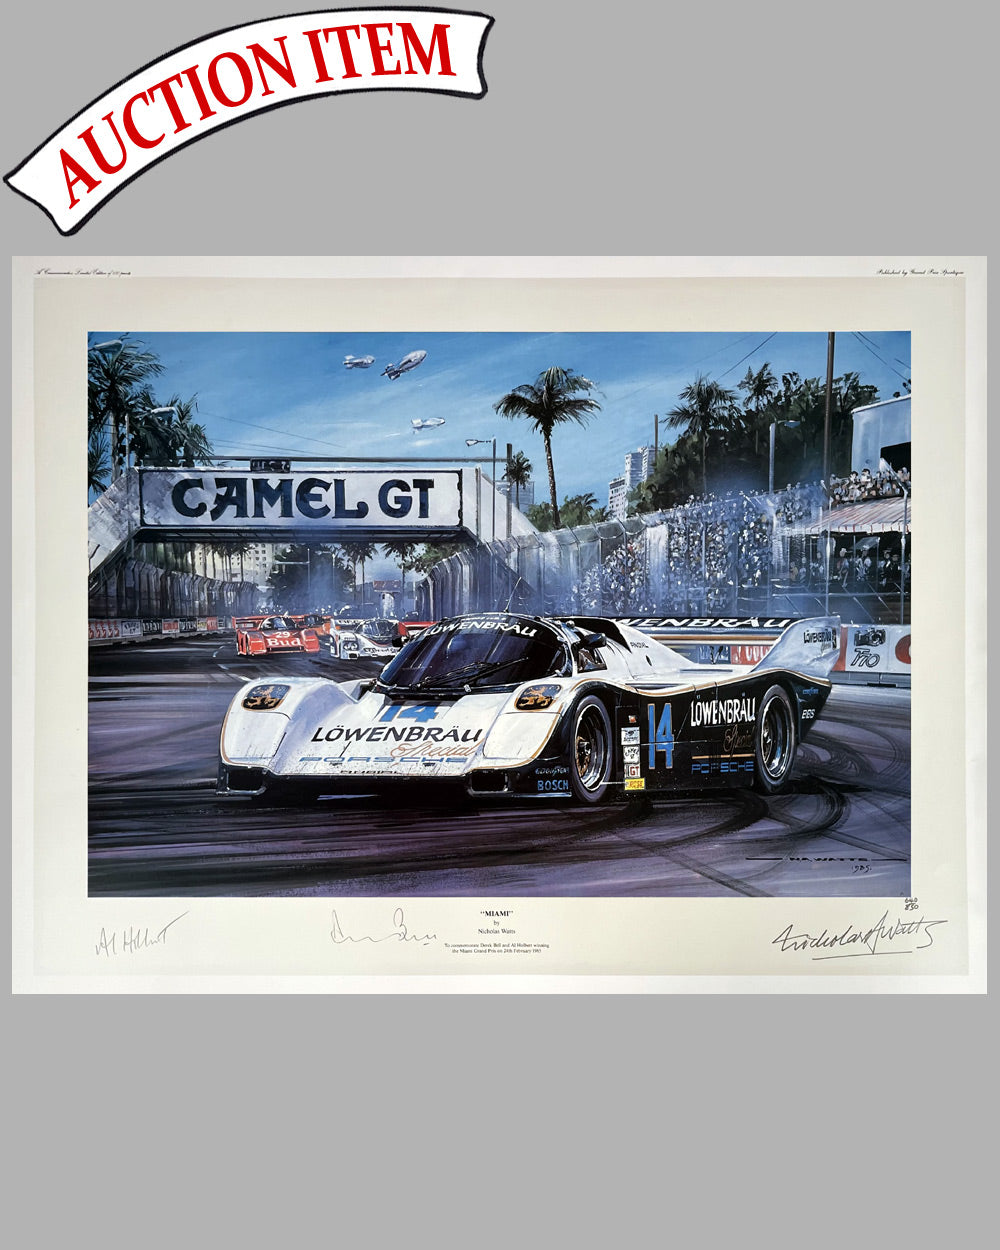 9 - Miami print by Nicholas Watts, hand autographed by Holbert and Bell